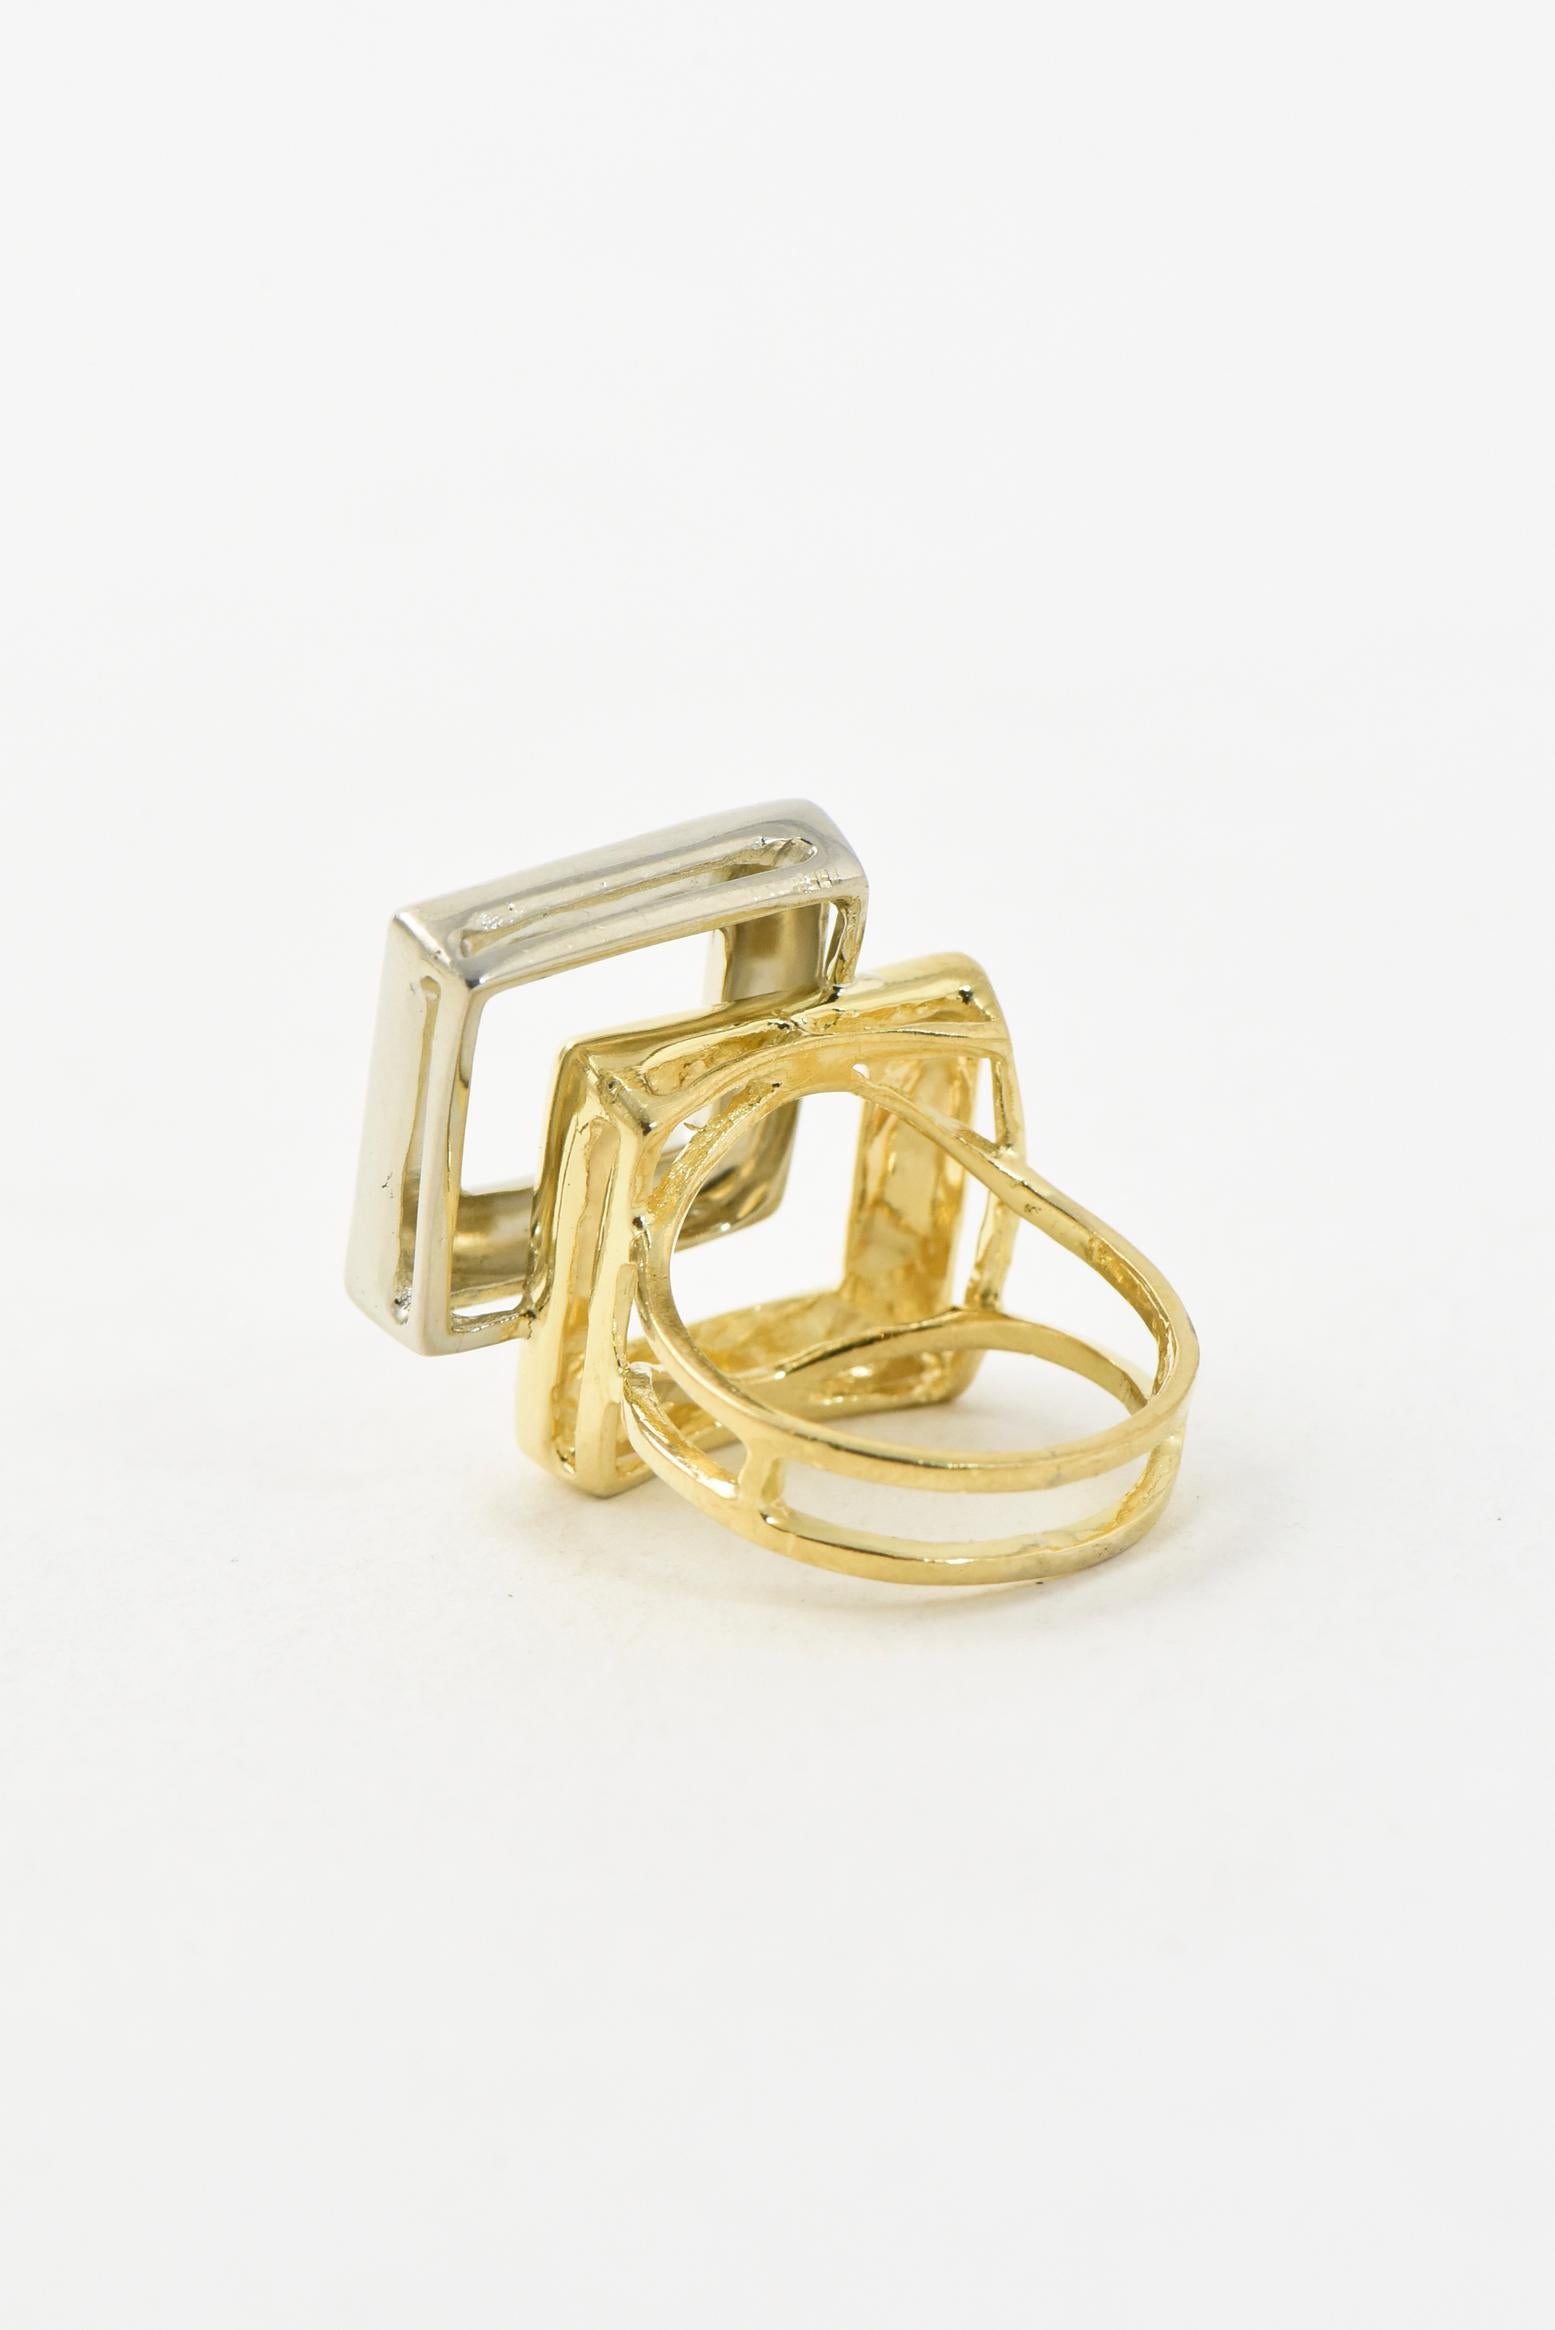 Mid 20th Century Geometric White and Yellow Square Gold Ring For Sale 1